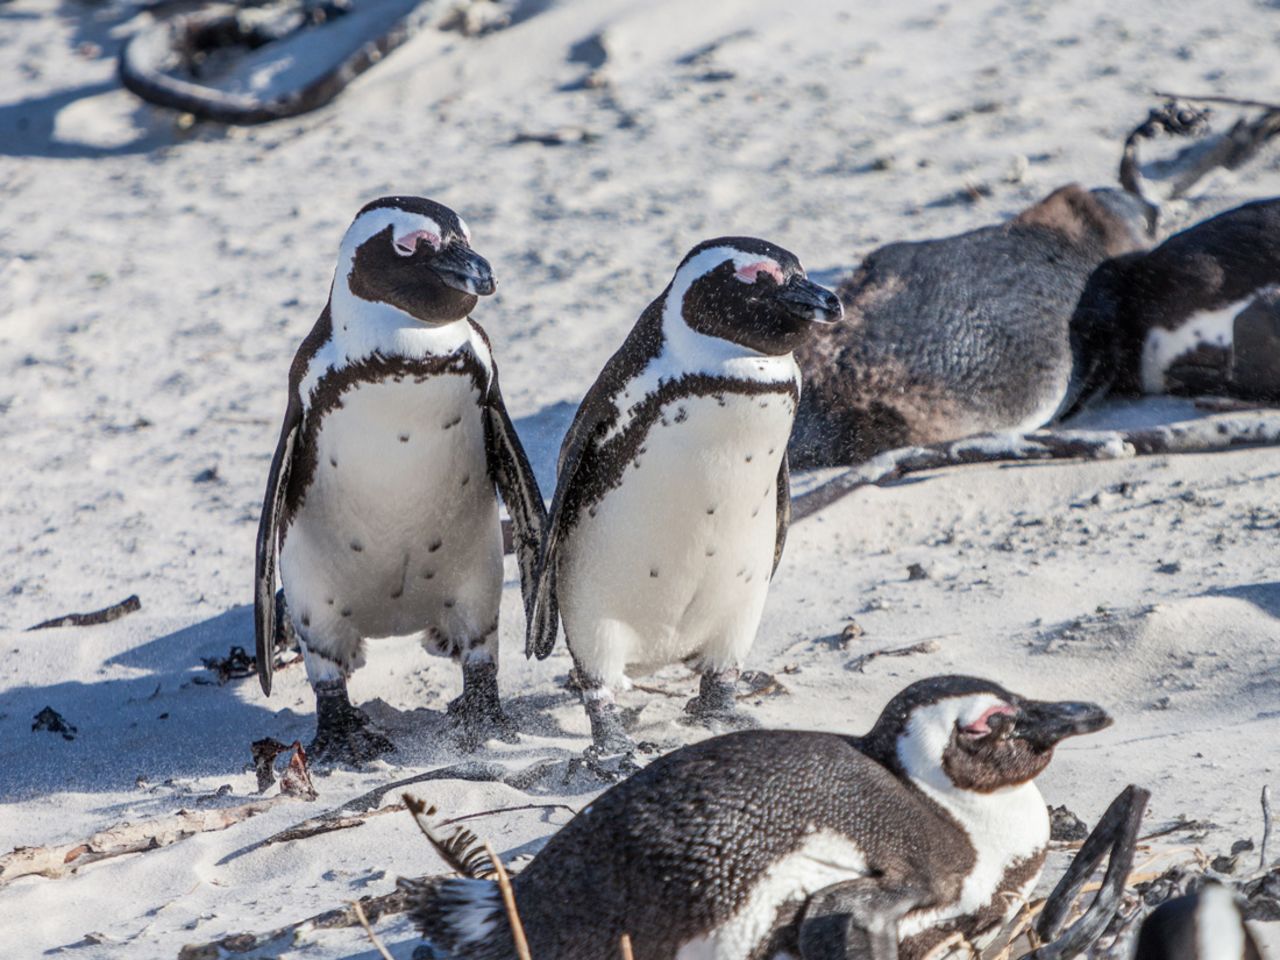 African penguins are listed as an endangered species. Their decreasing population is spurred by loss of nesting grounds due to guano removal by humans, as well as a decreasing food supply as a result of overfishing. 